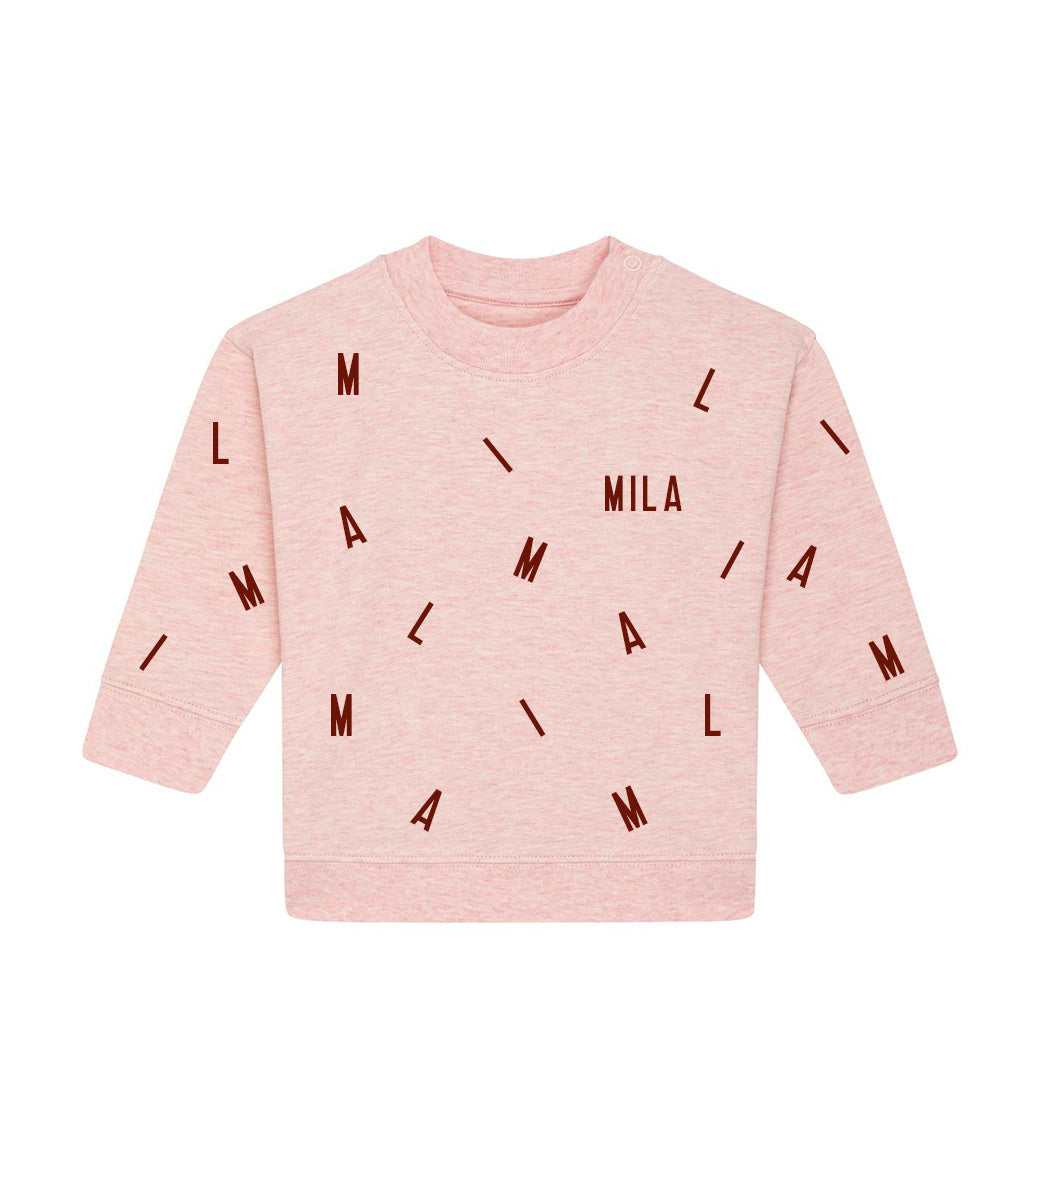 Organic sweater // Dancing letters - with name